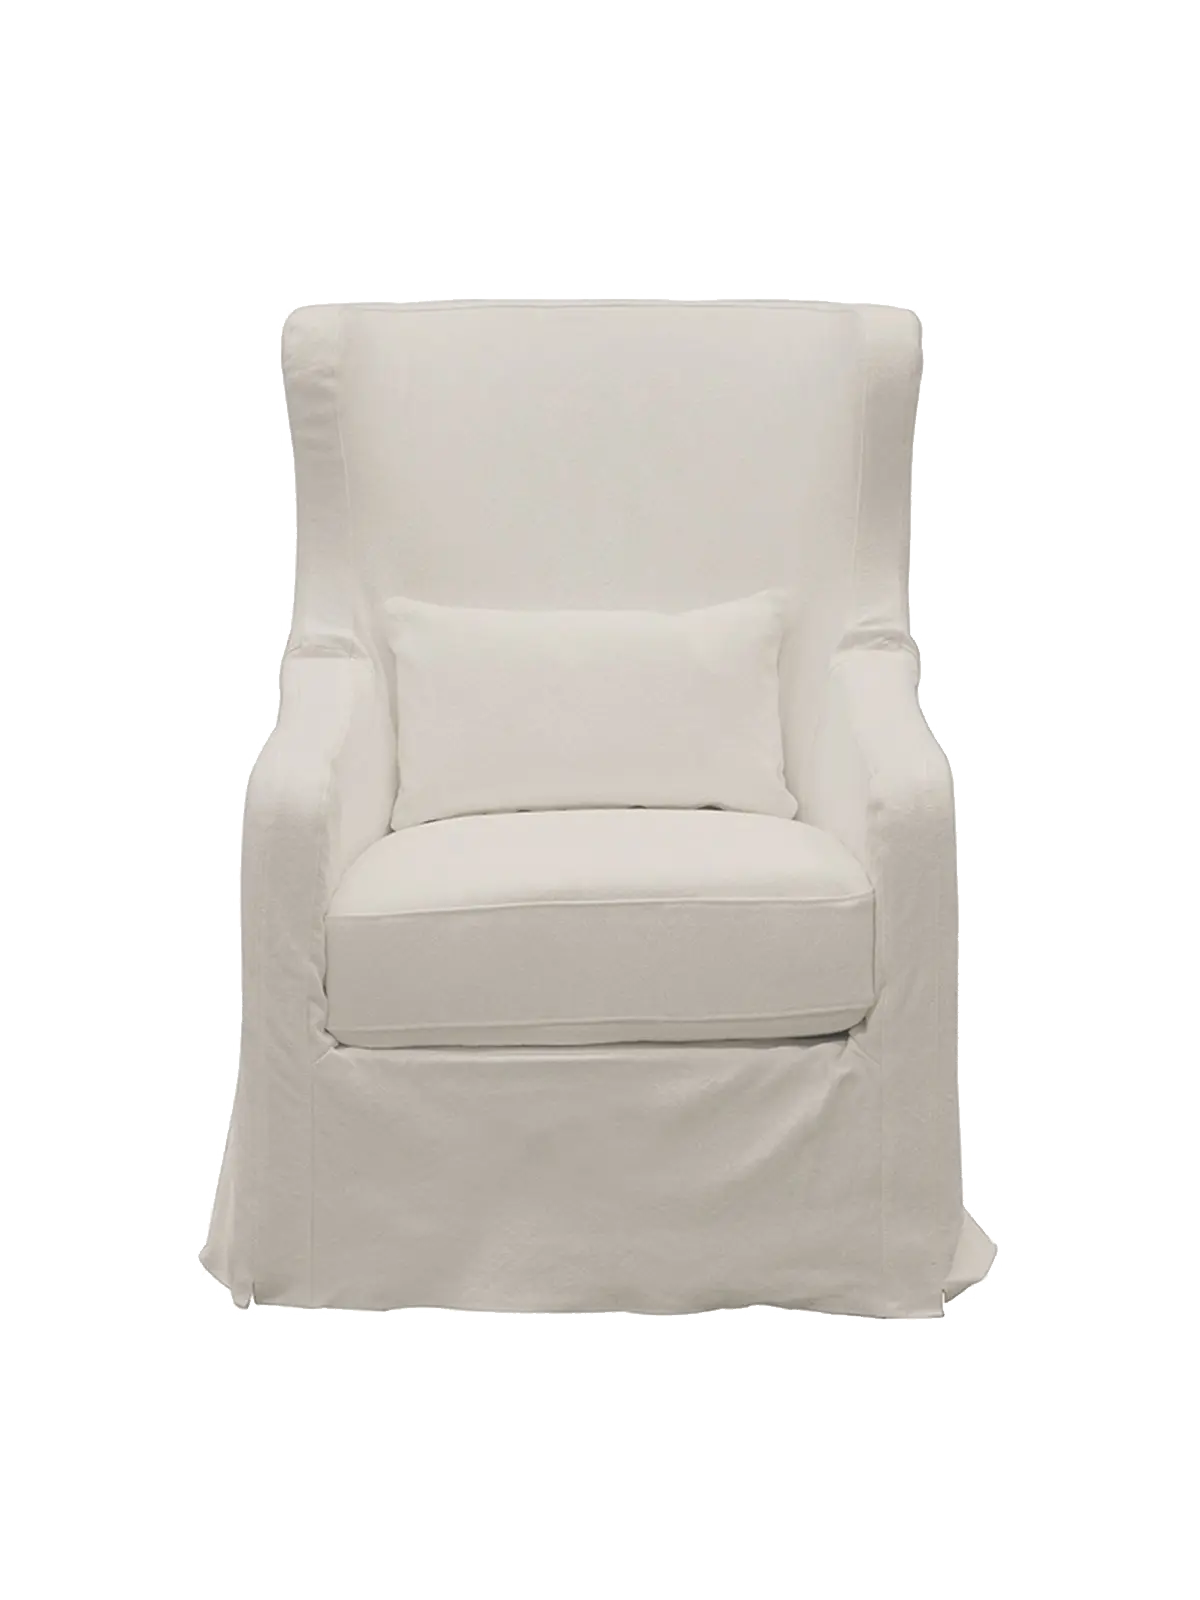 Cape Cod Chair in White with Swivel Base CC Interiors